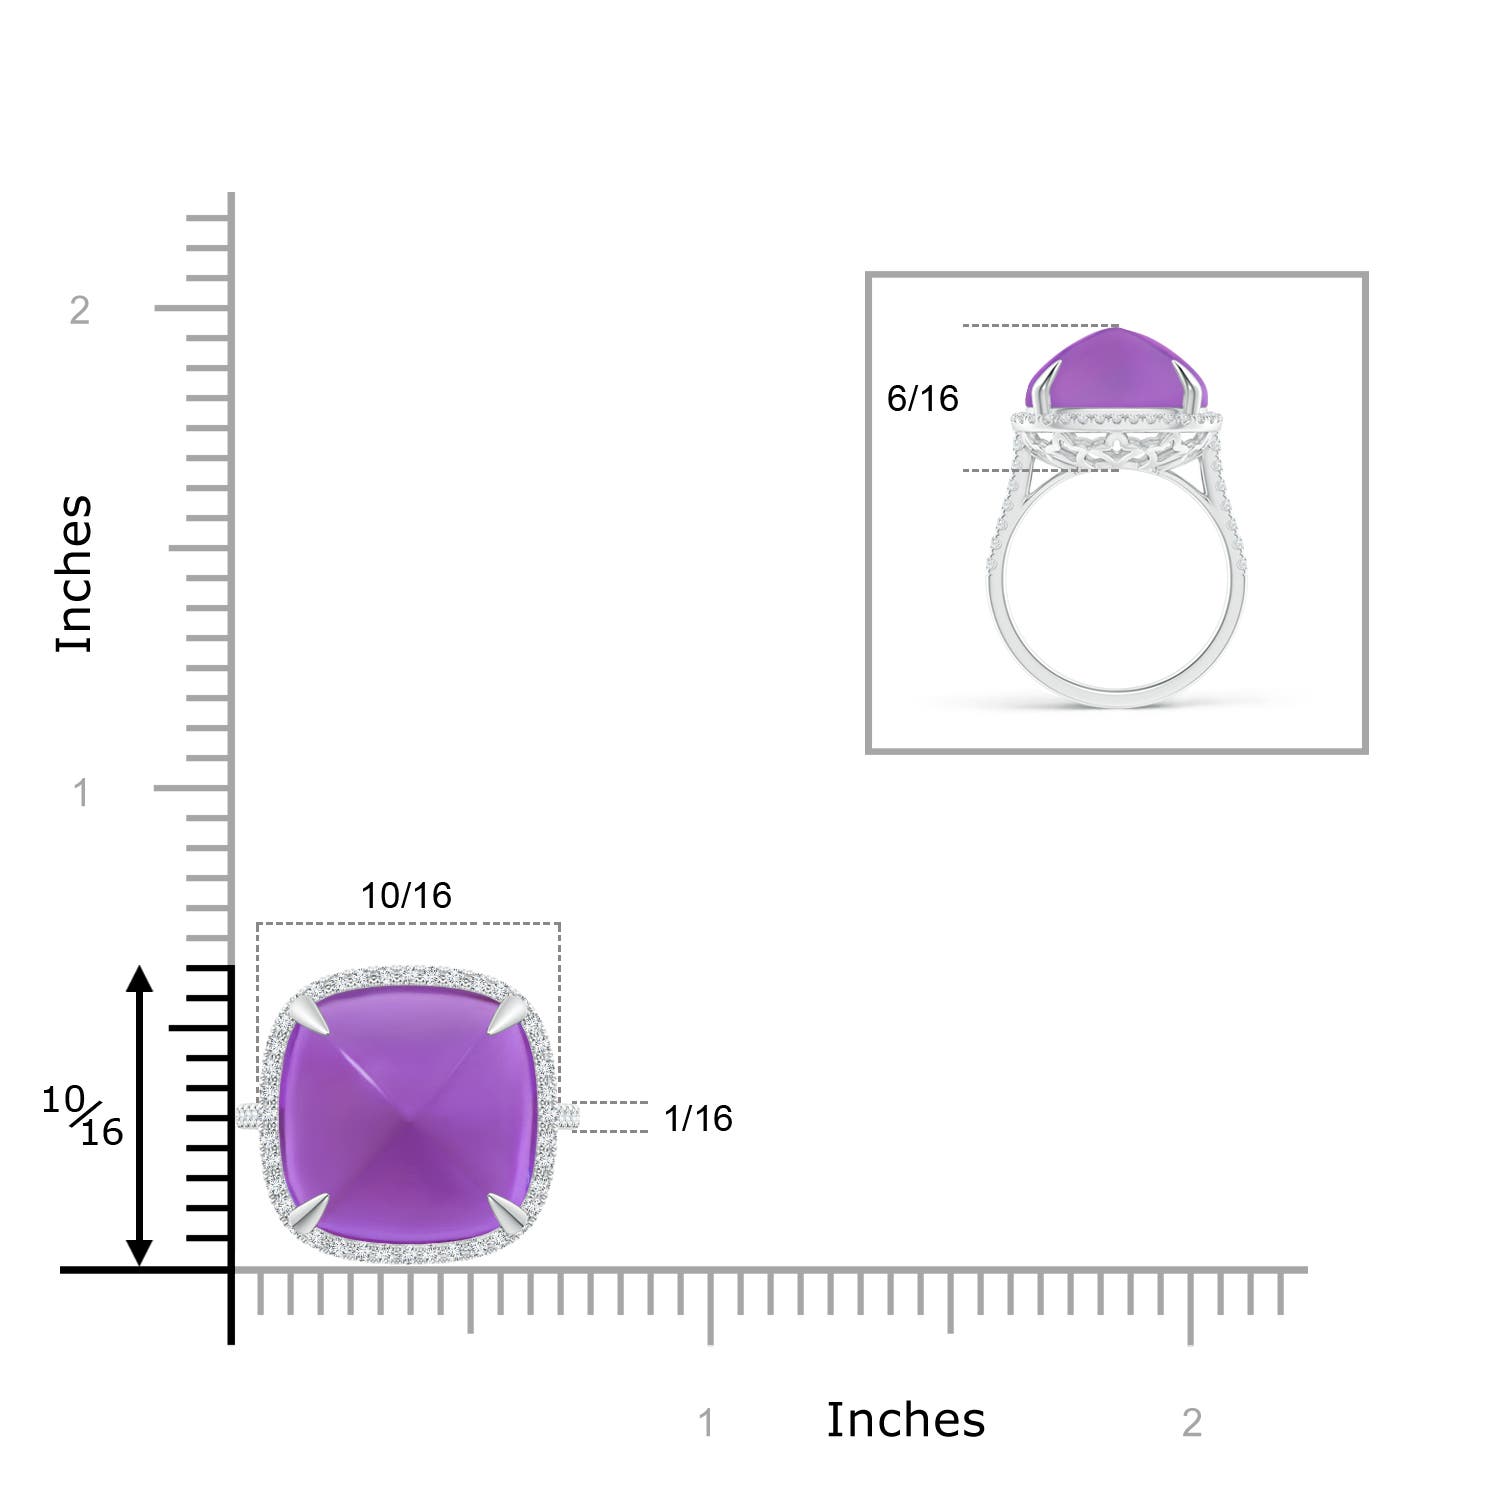 AAA - Amethyst / 12.91 CT / 14 KT White Gold